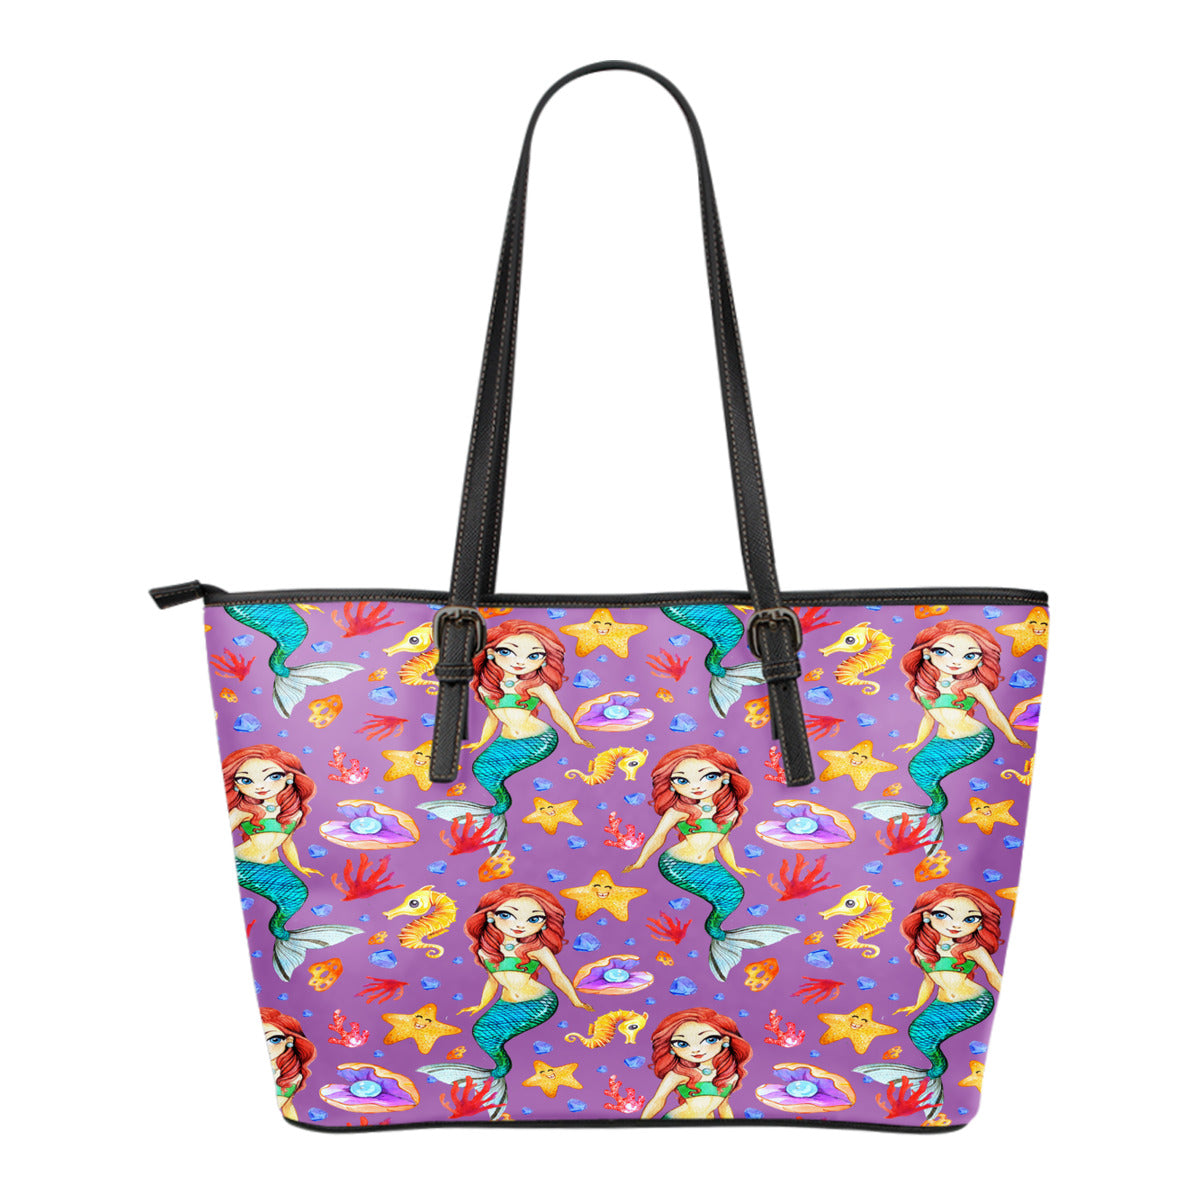 Mermaid Themed Design C15 Women Small Leather Tote Bag